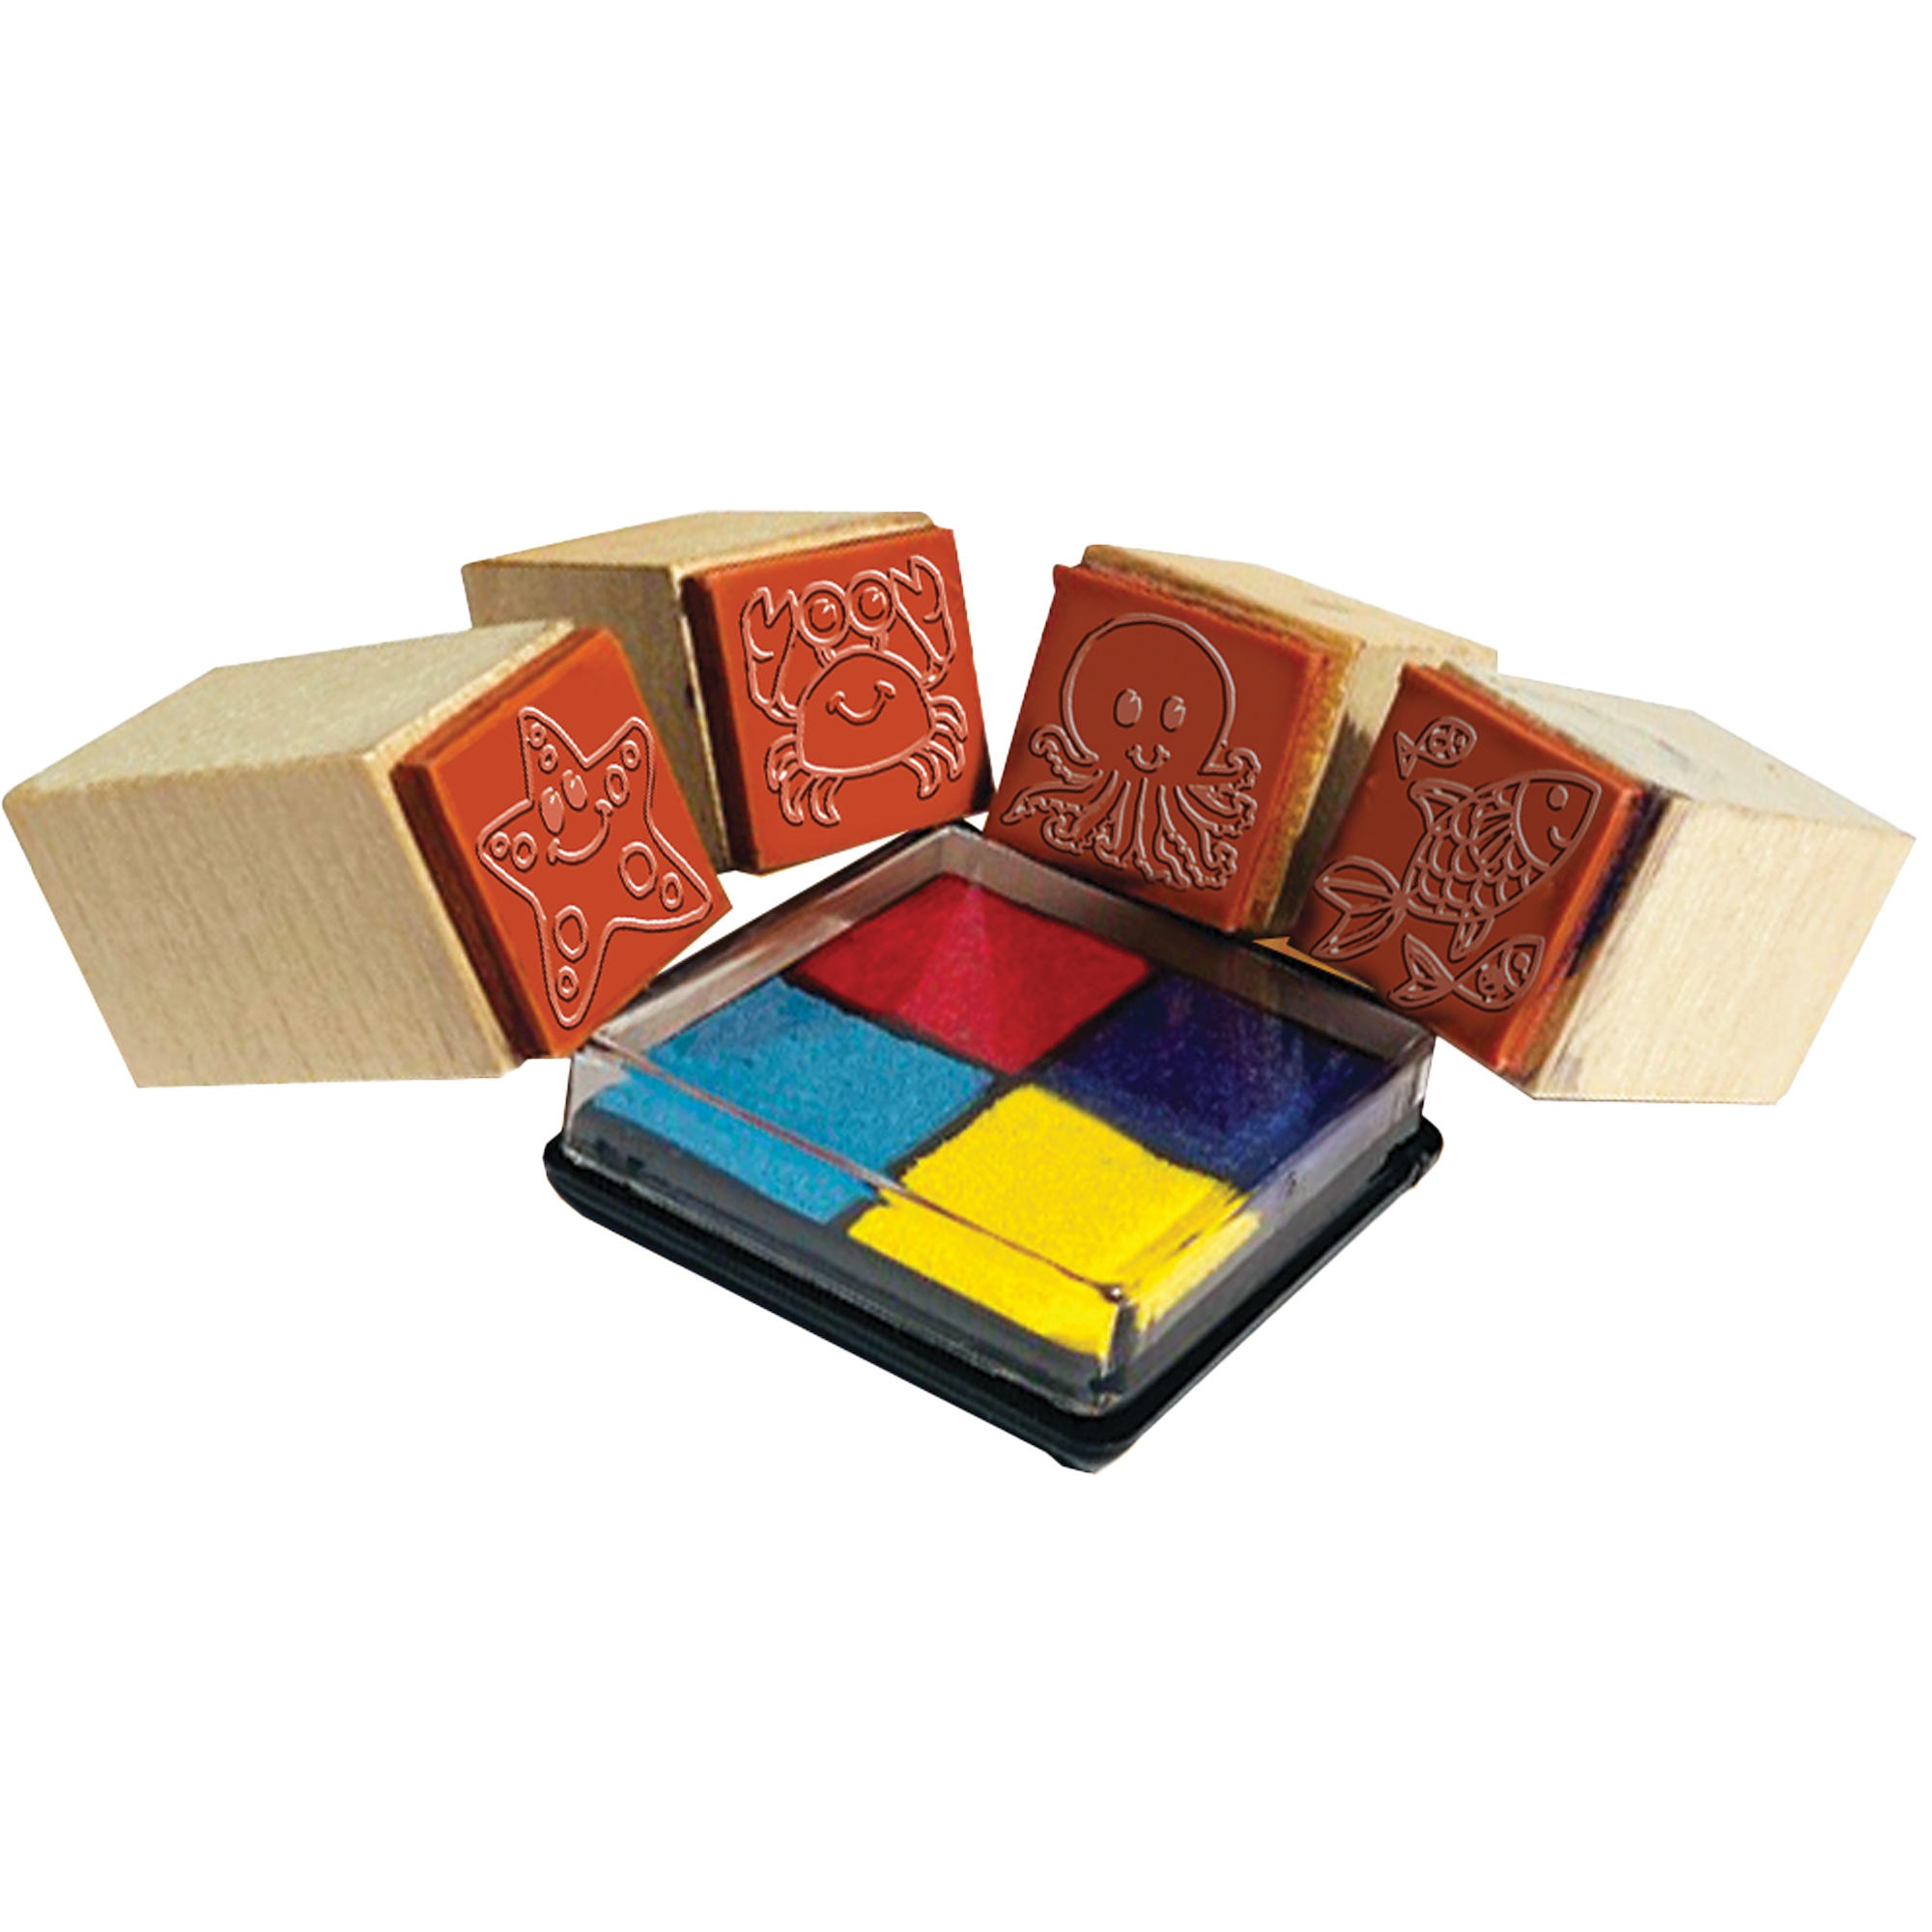 American Crafts Wooden Stamp Set Houses